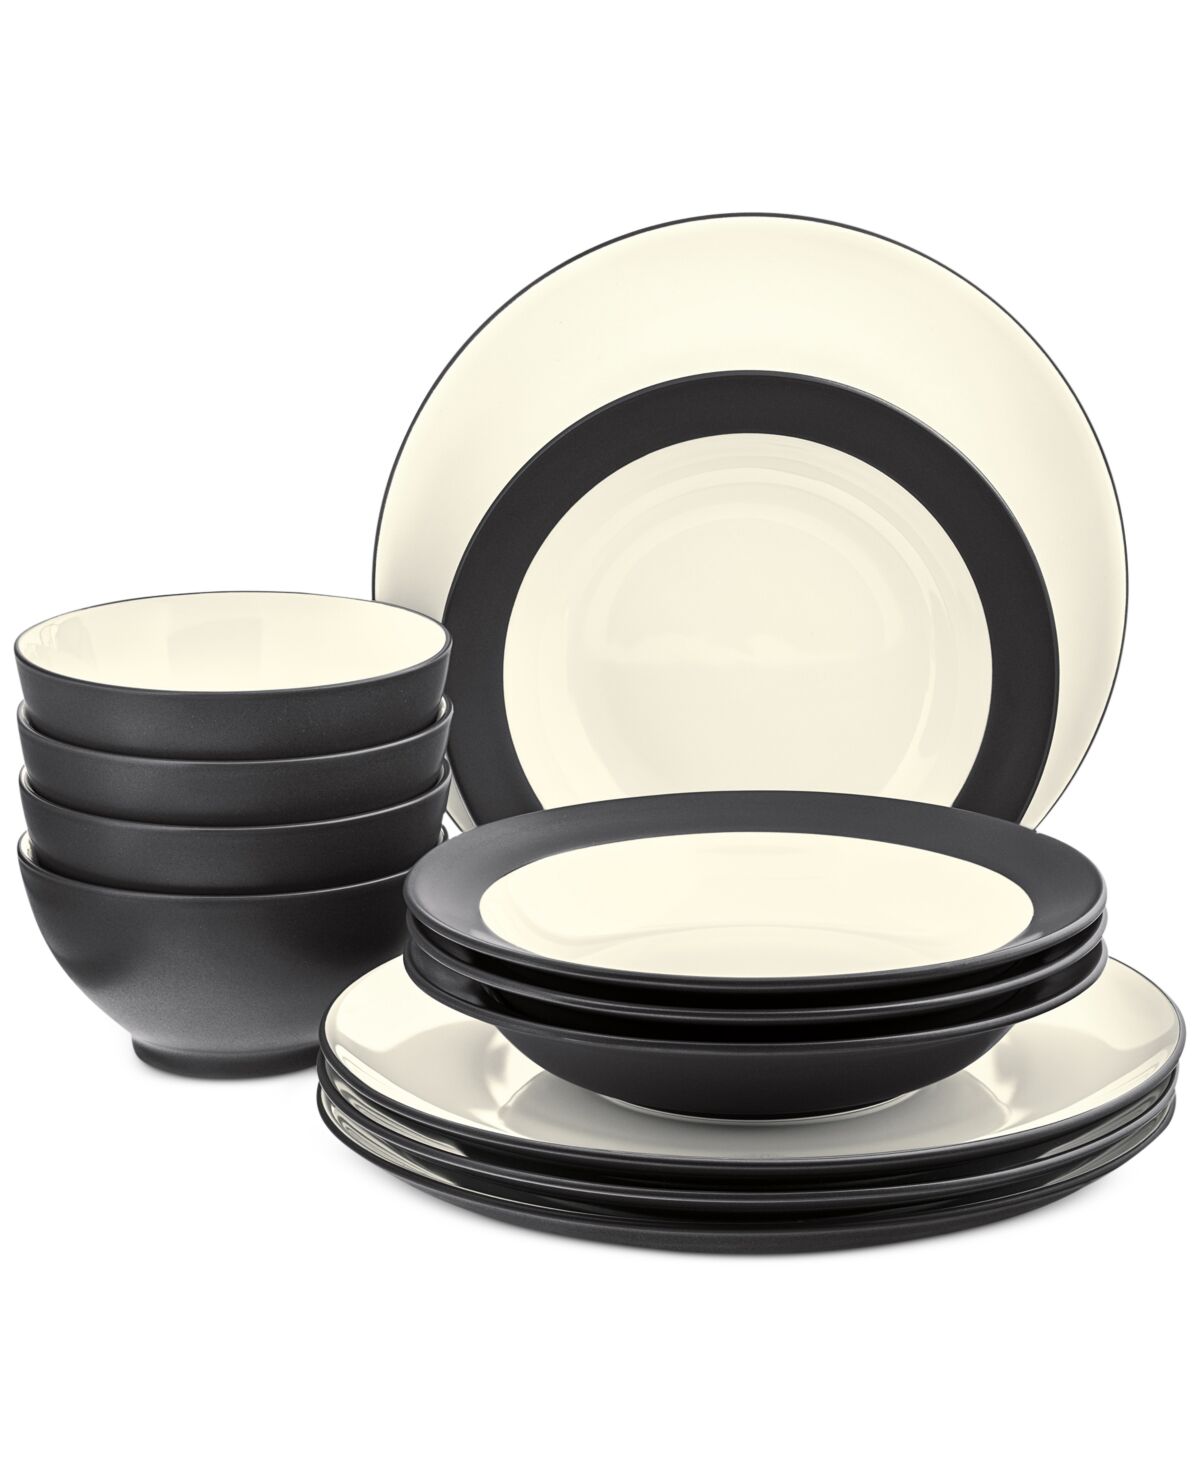 Noritake Colorwave Coupe 12-Piece Dinnerware Set, Service for 4, Created for Macy's - Graphite